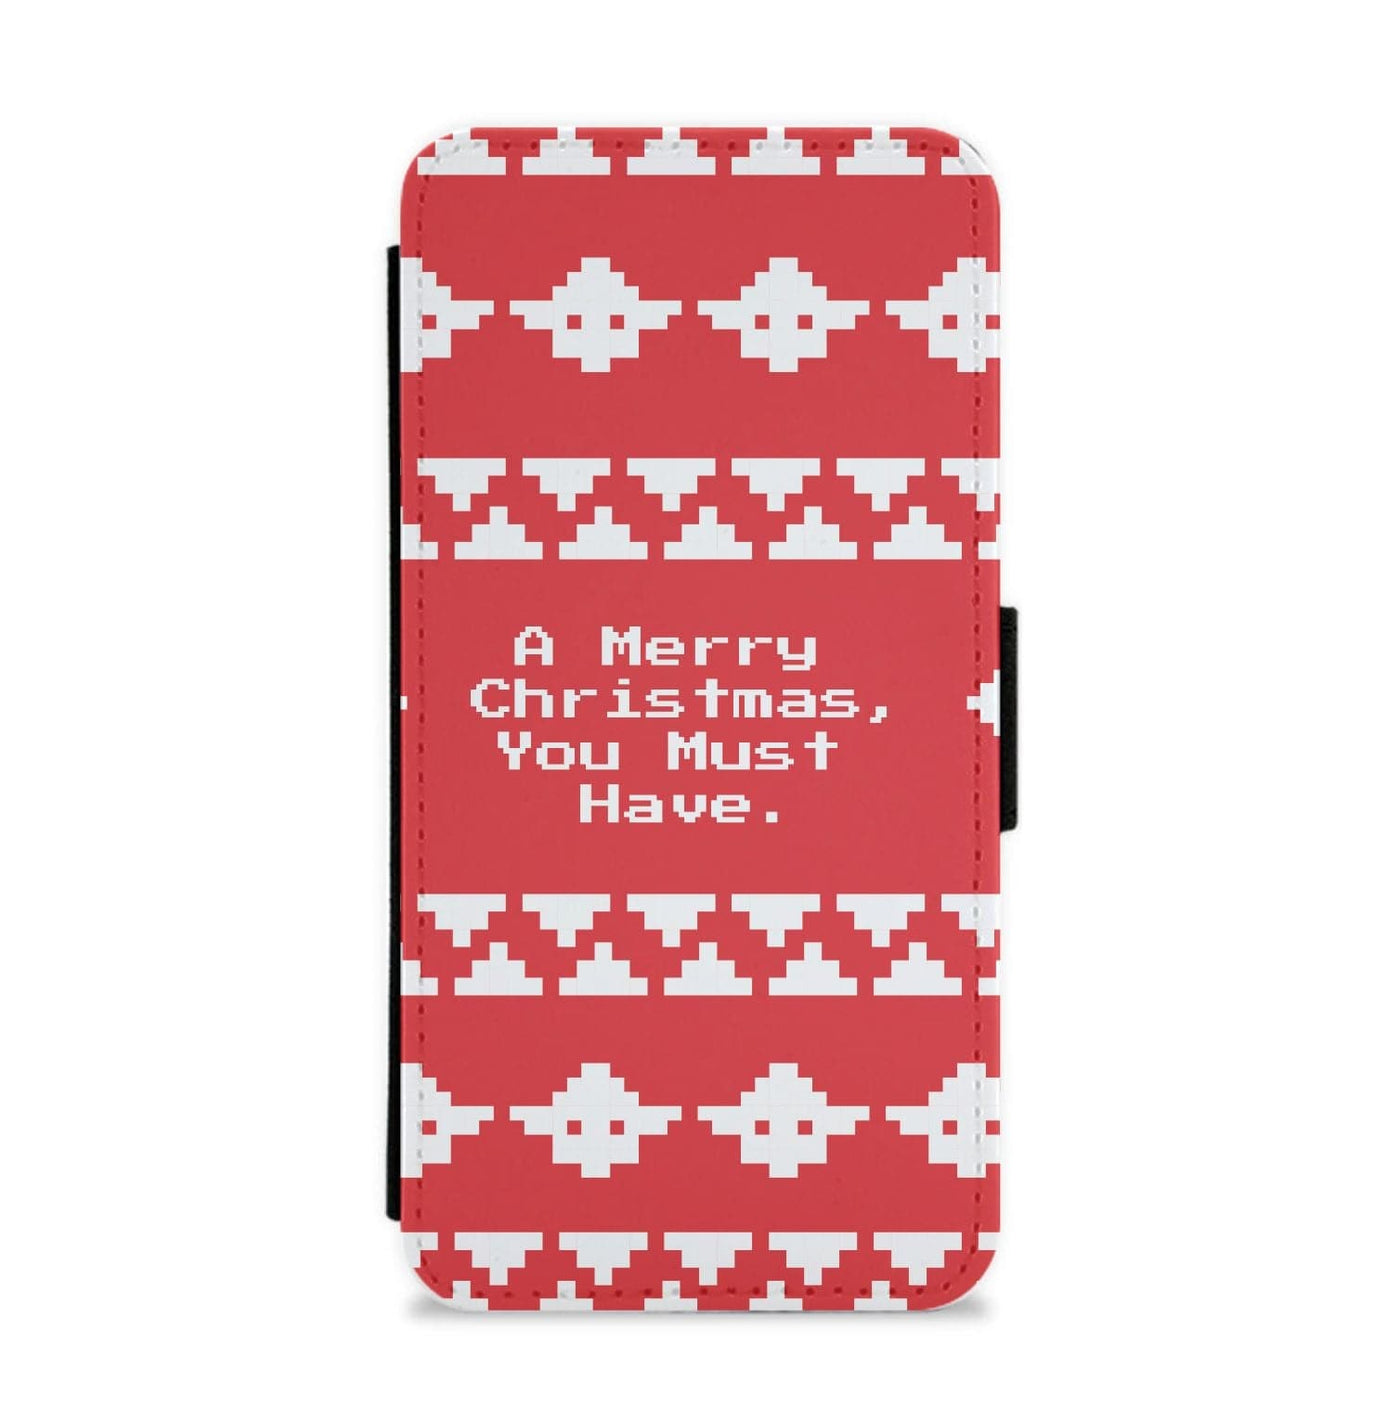 A Merry Christmas You Must Have - Star Wars Flip / Wallet Phone Case